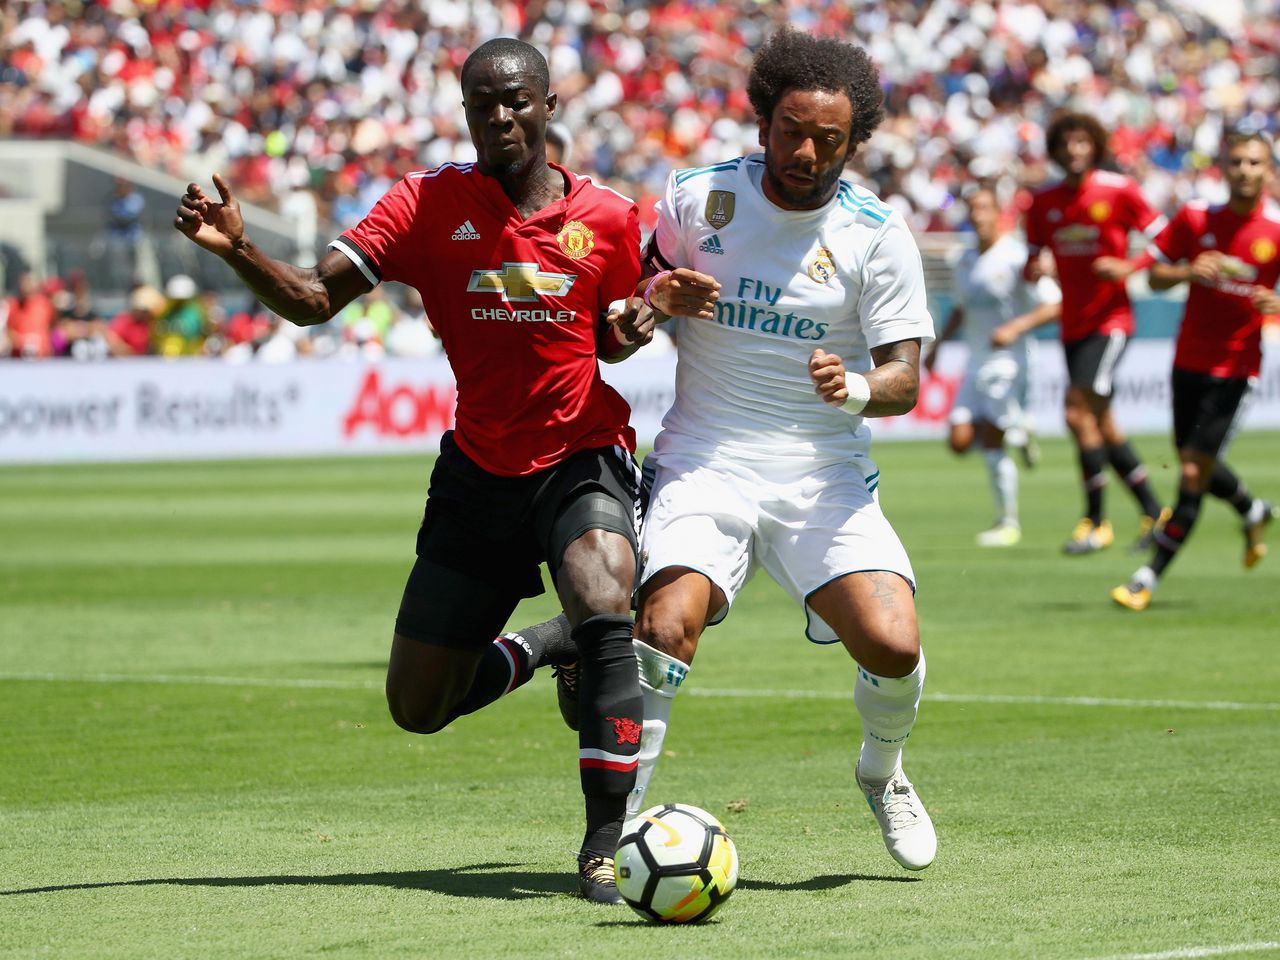 Man Utd v Real Madrid: International Champions Cup preview